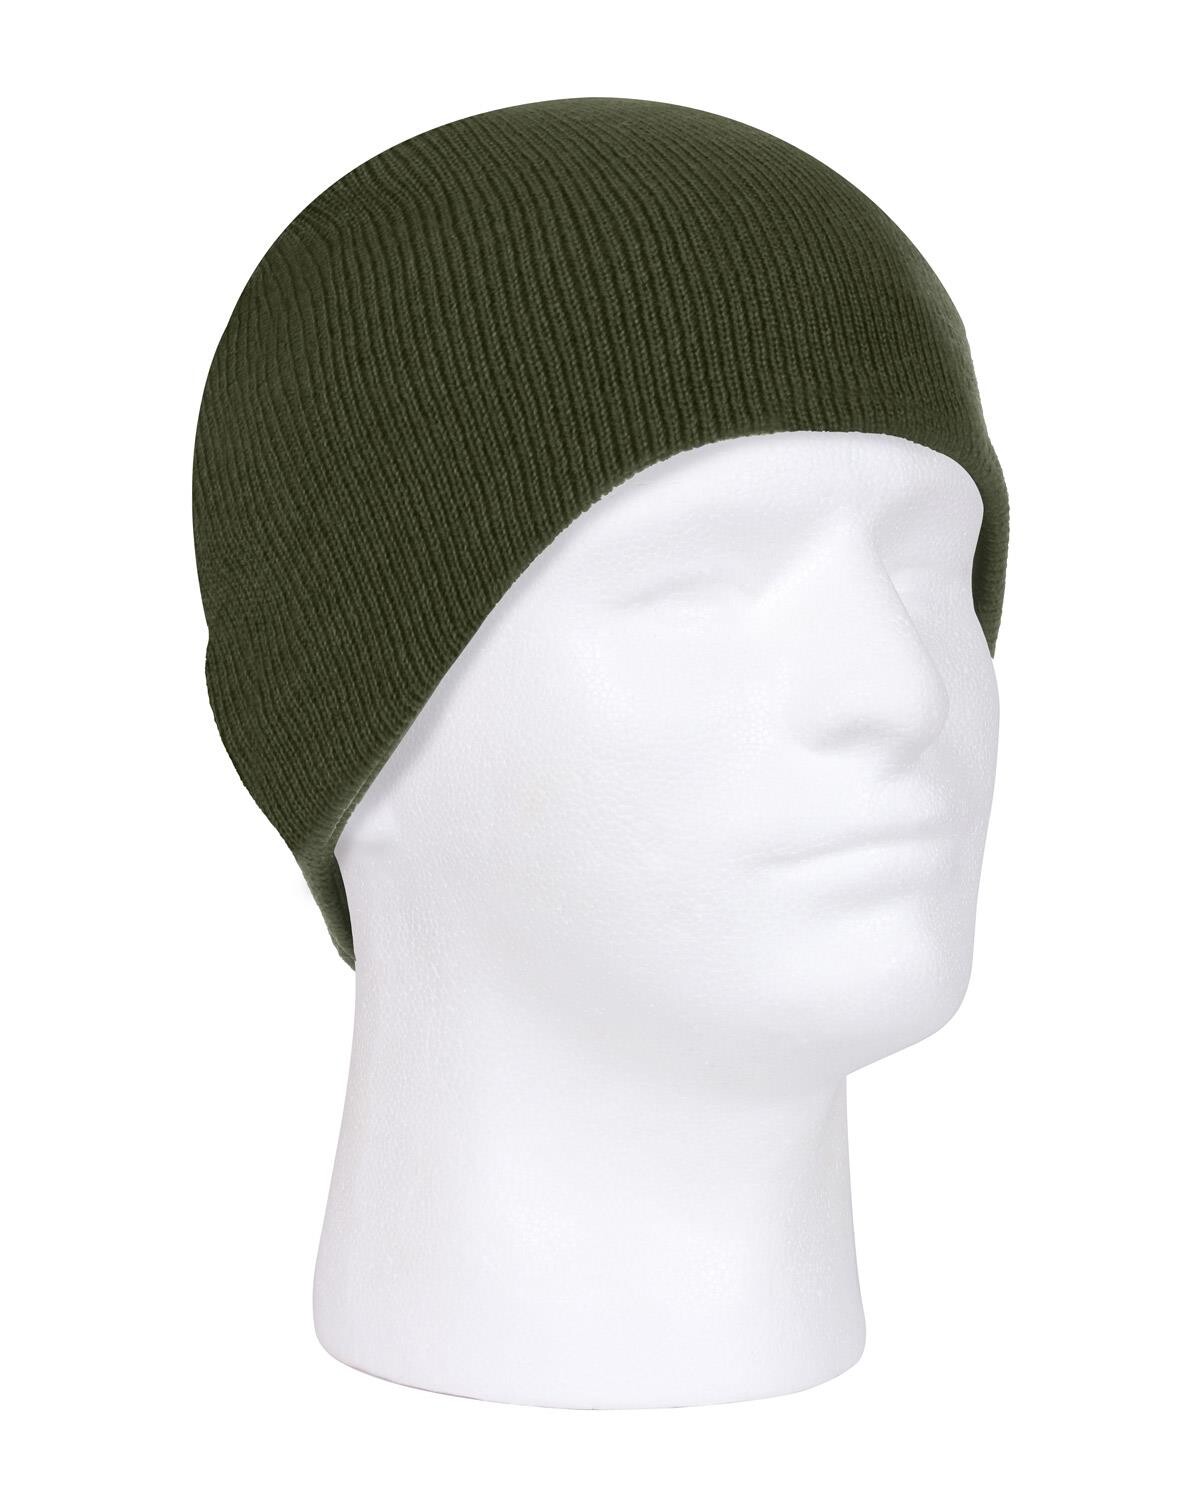 Rothco Beanie (Oliven, One Size)